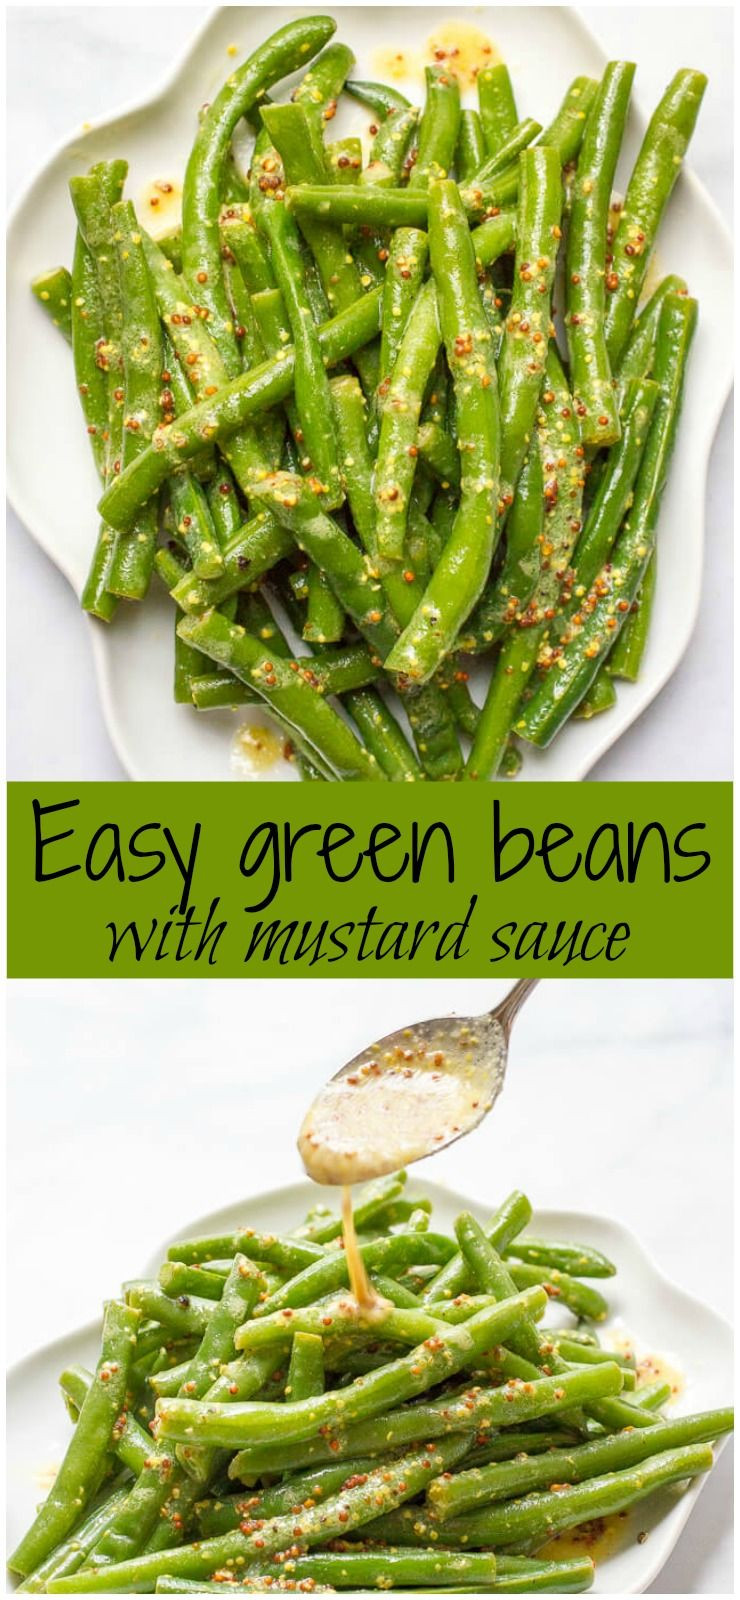 Gourmet Vegetable Side Dishes
 Green beans with mustard butter sauce Recipe